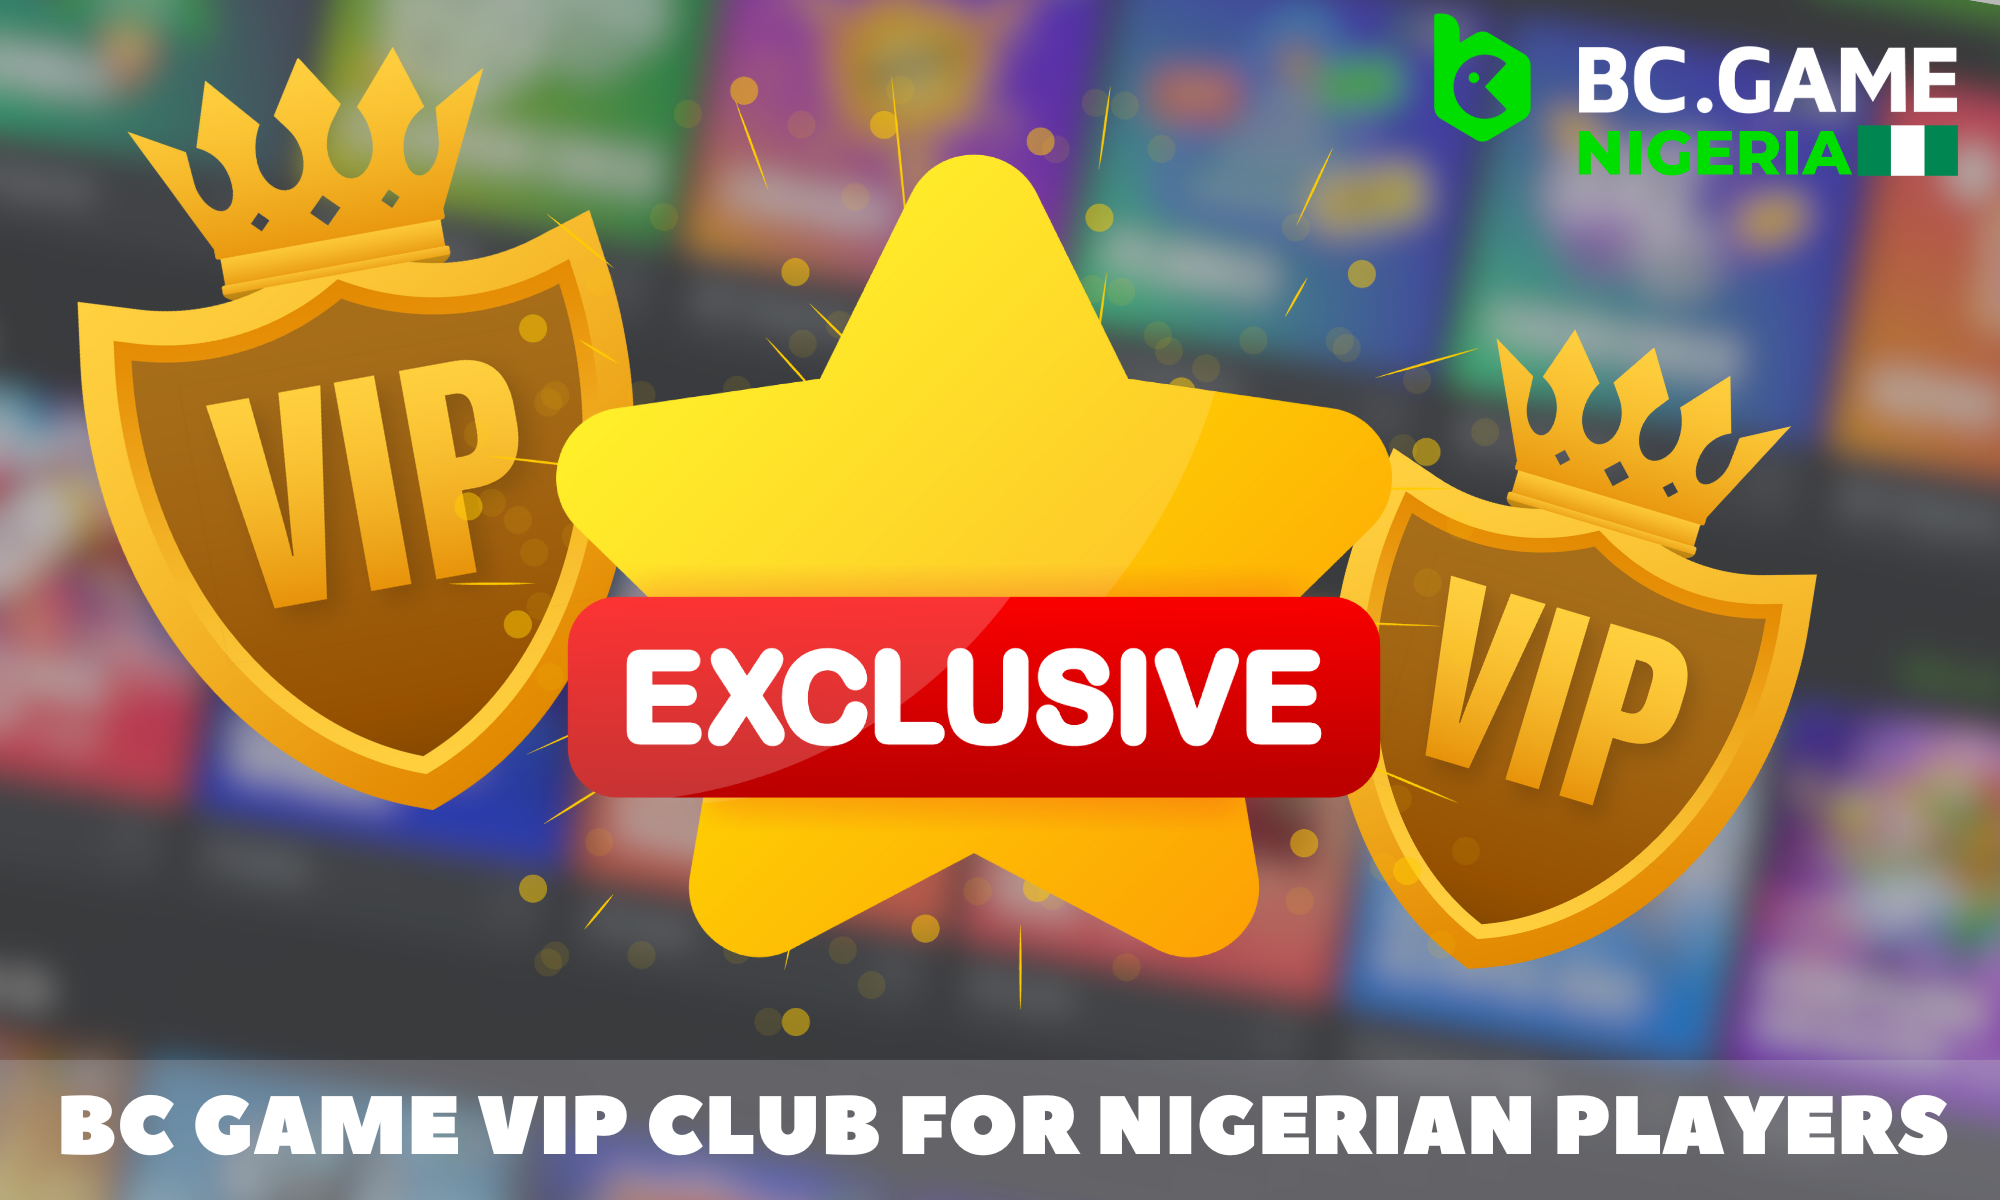 BC Game VIP Club is available for players from Nigeria